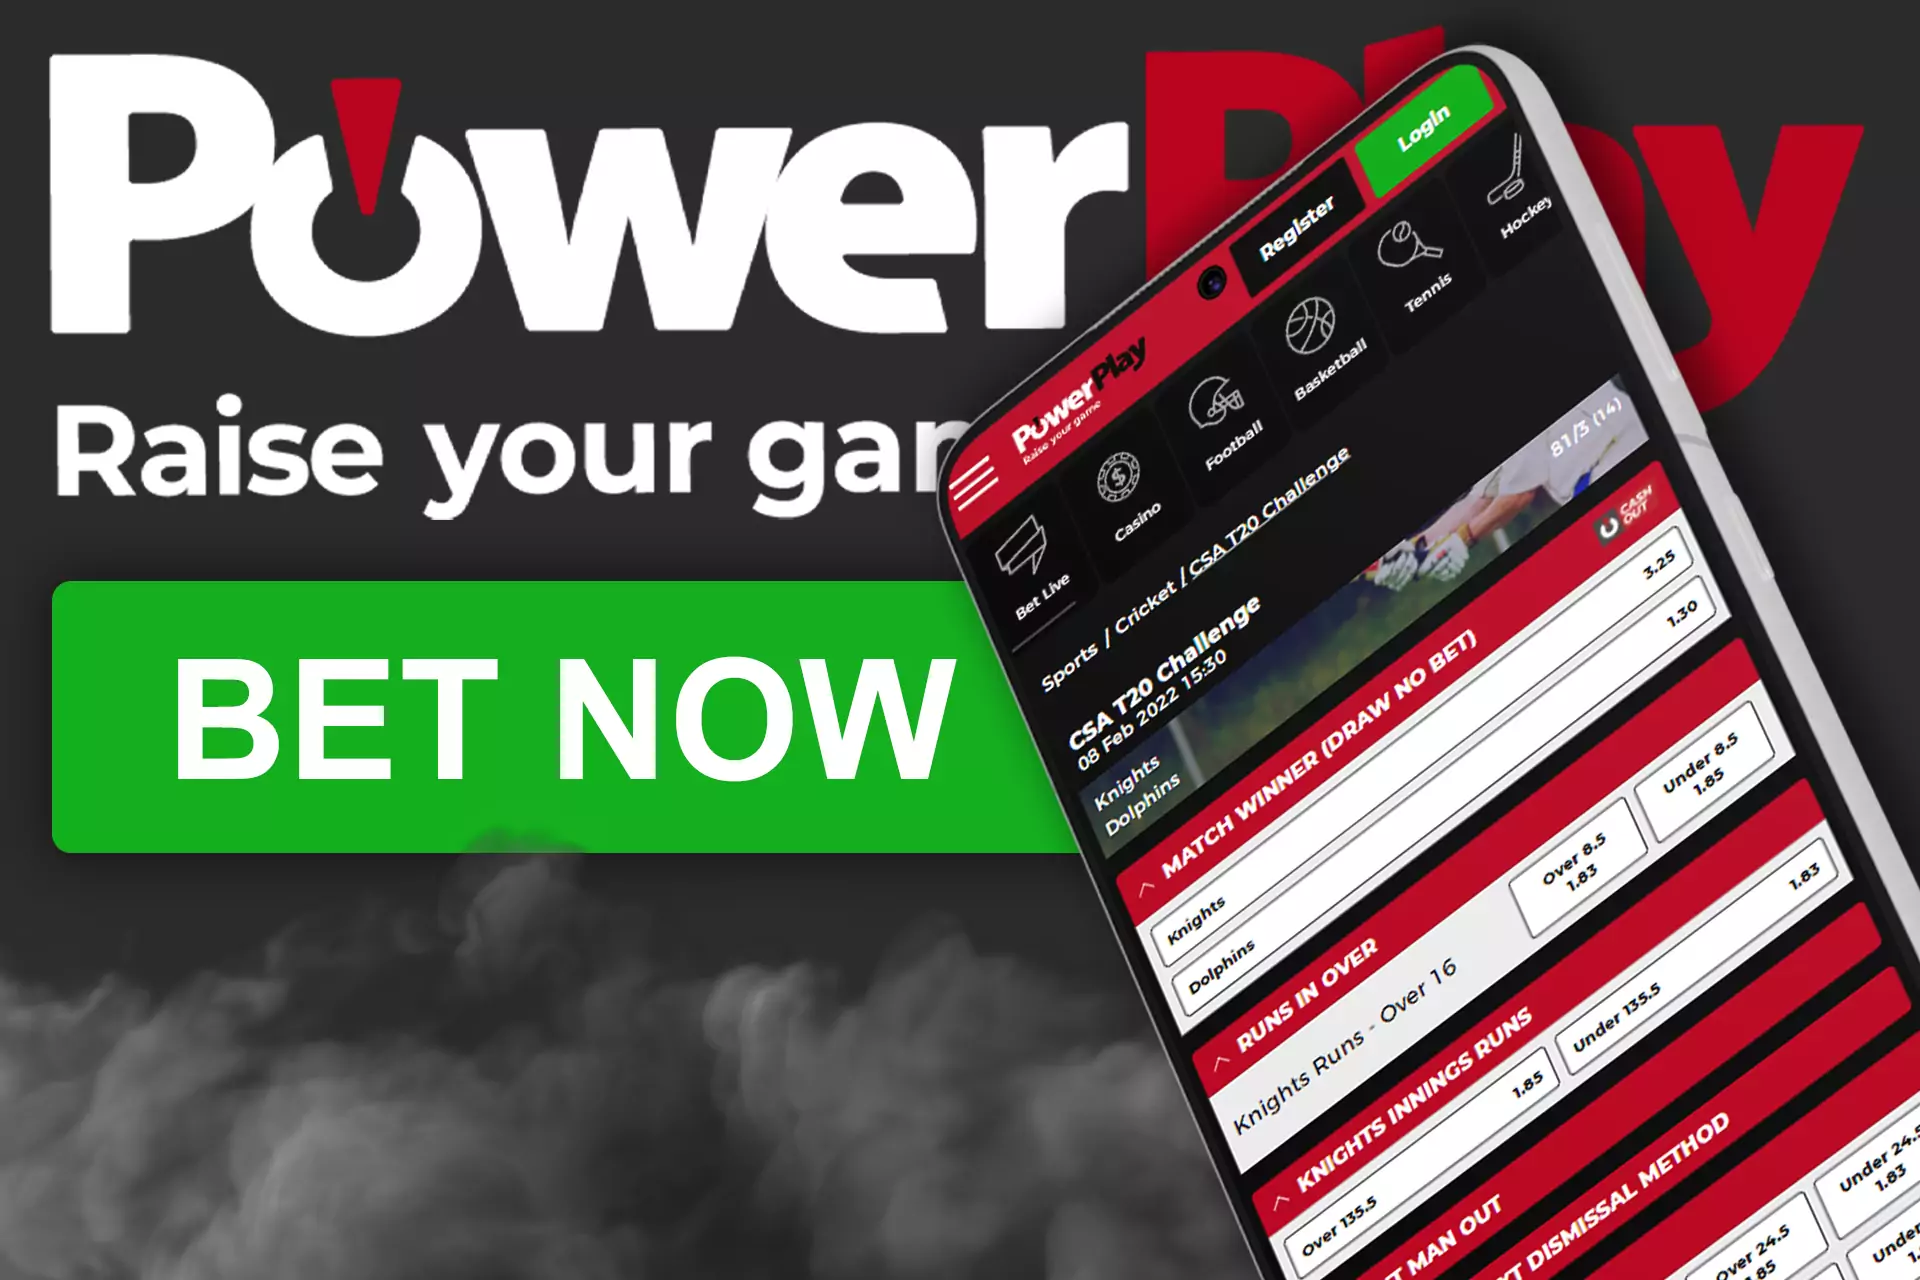 Create an account, log in and place a bet on a cricket event.